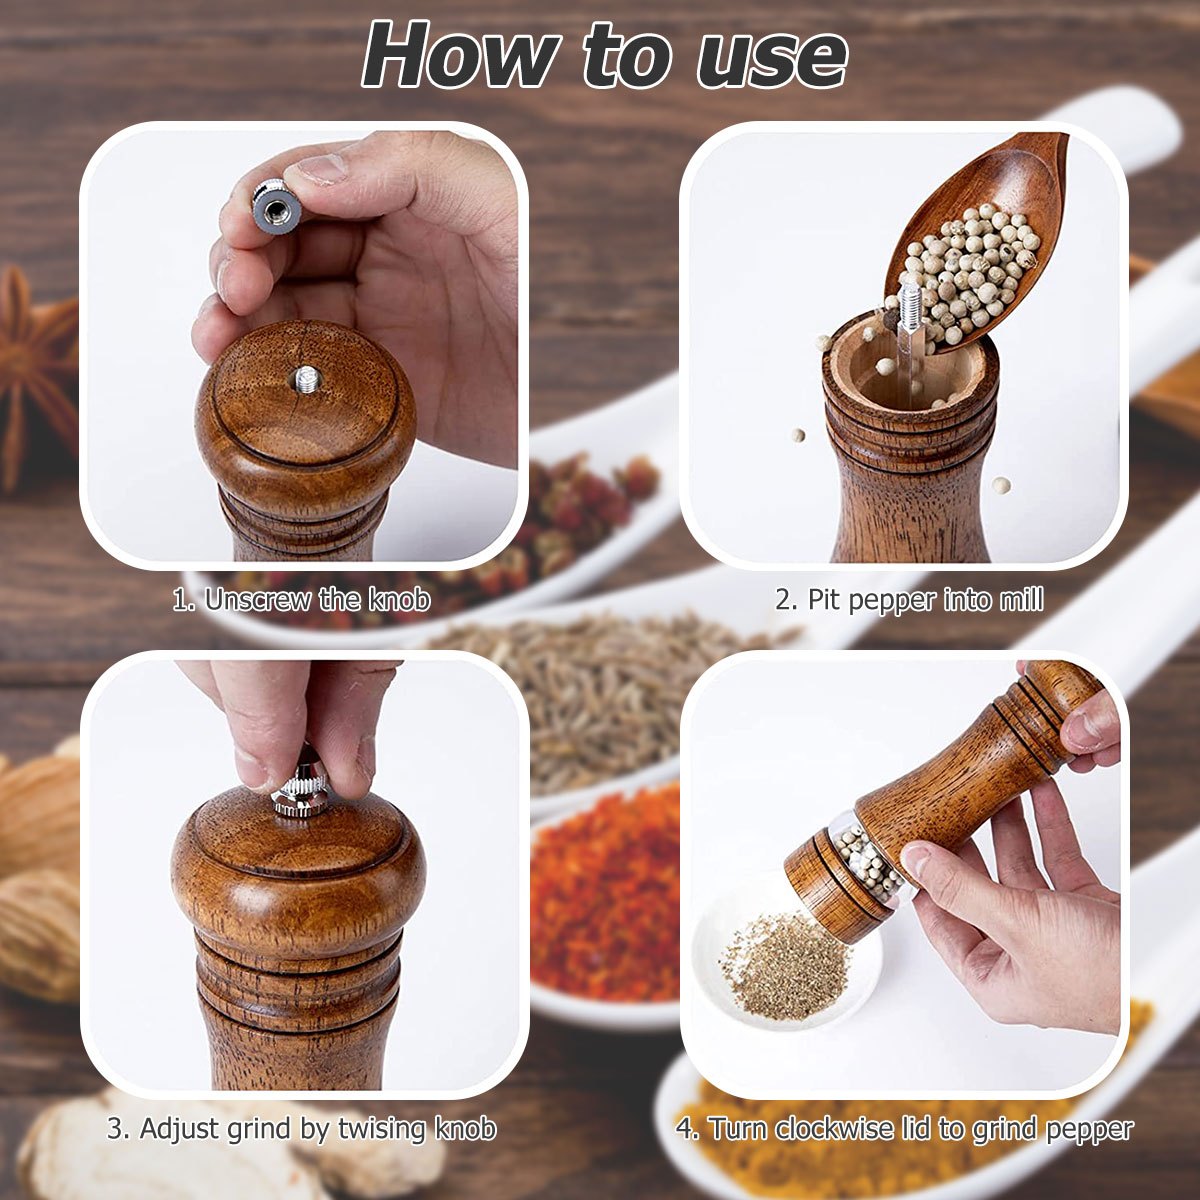 The New Acrylic Grinder Spices Salt Pepper Manual Grinders Mill